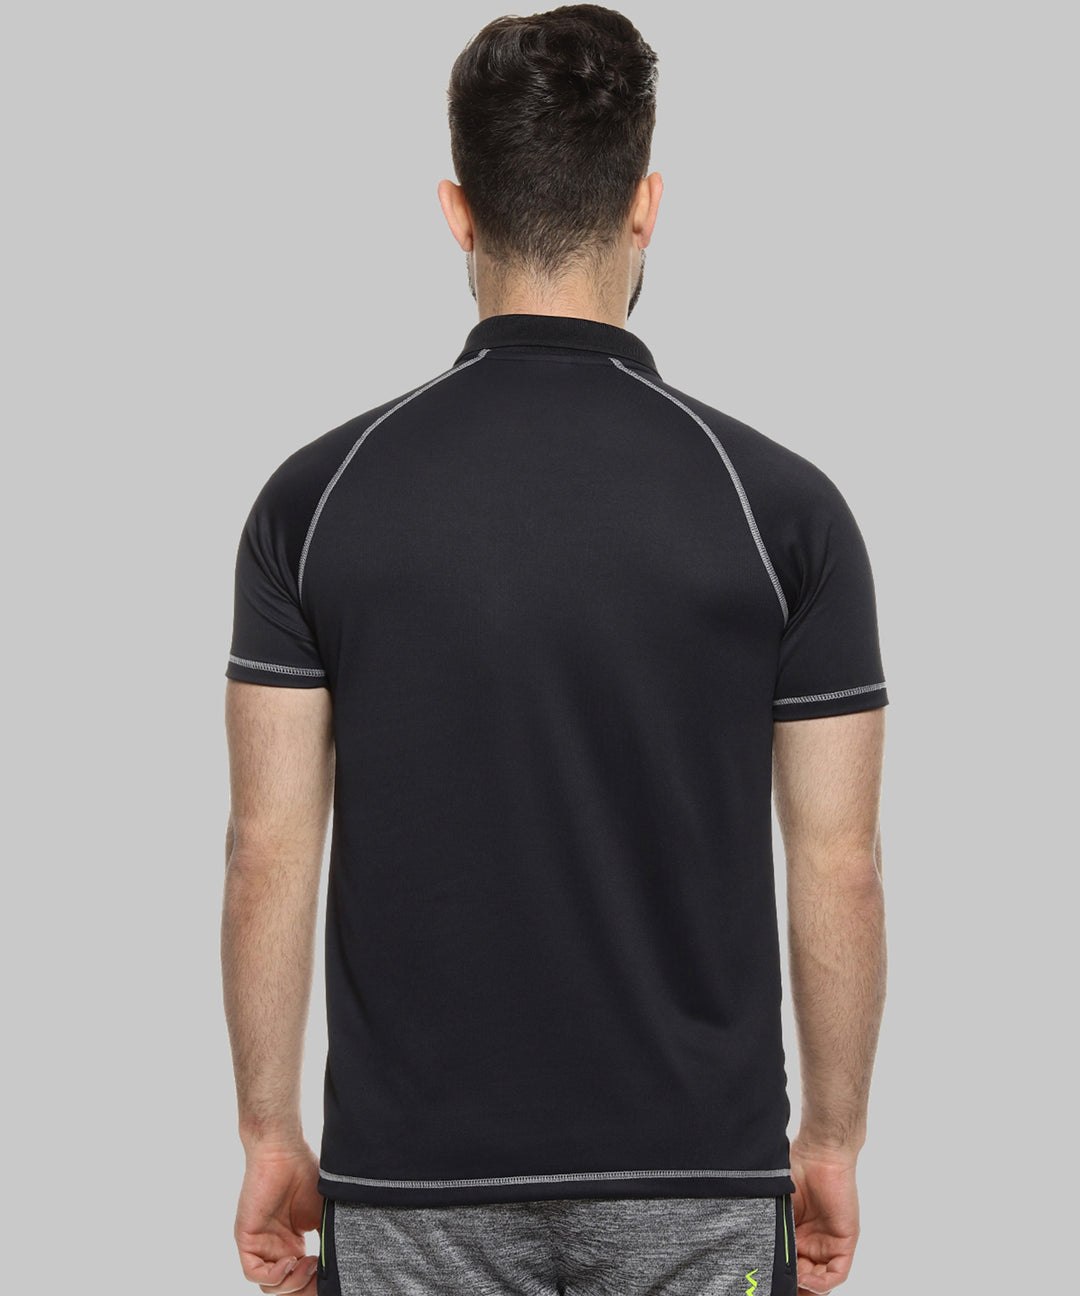 Black Men Solid Polyester Sports Tshirt Polo Neck